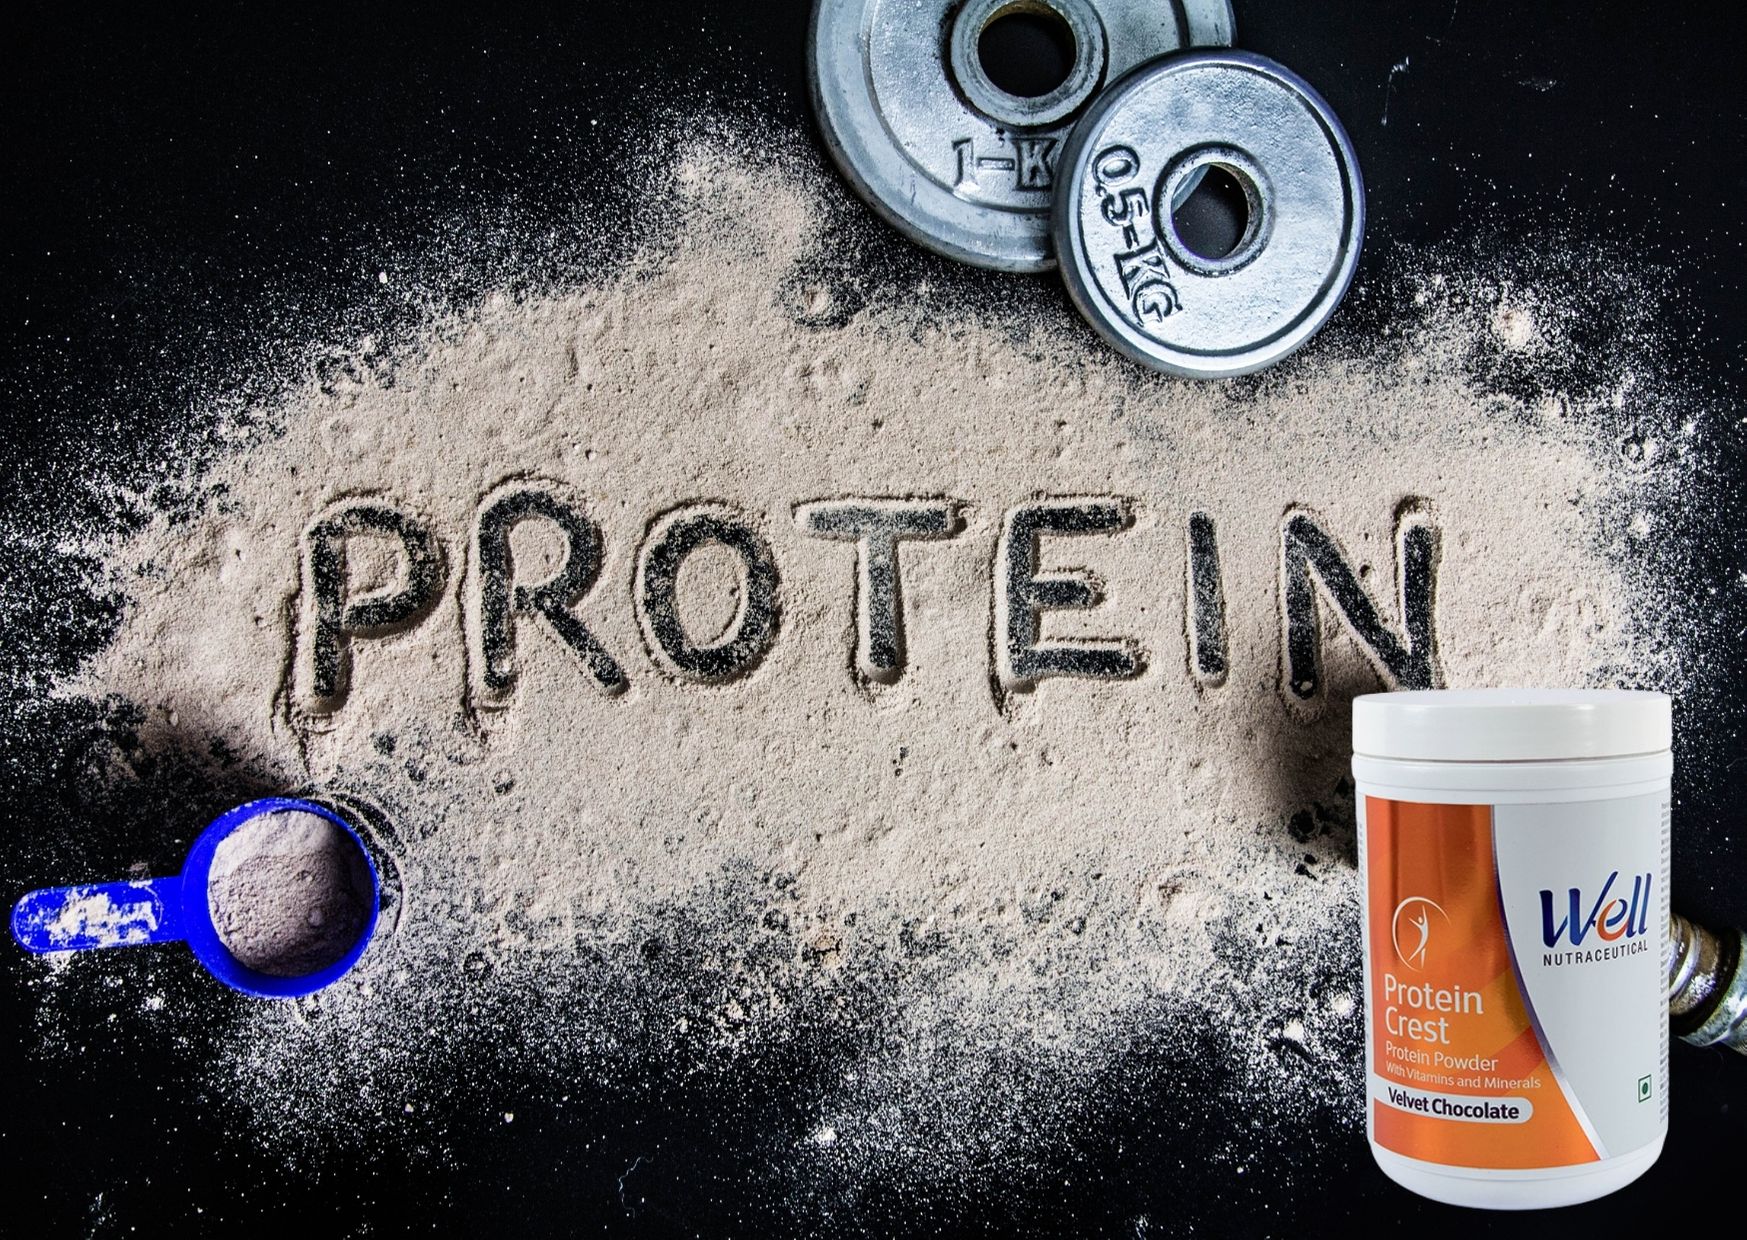 Well Protein Crest Powder Benefits In Hindi Modicare Product